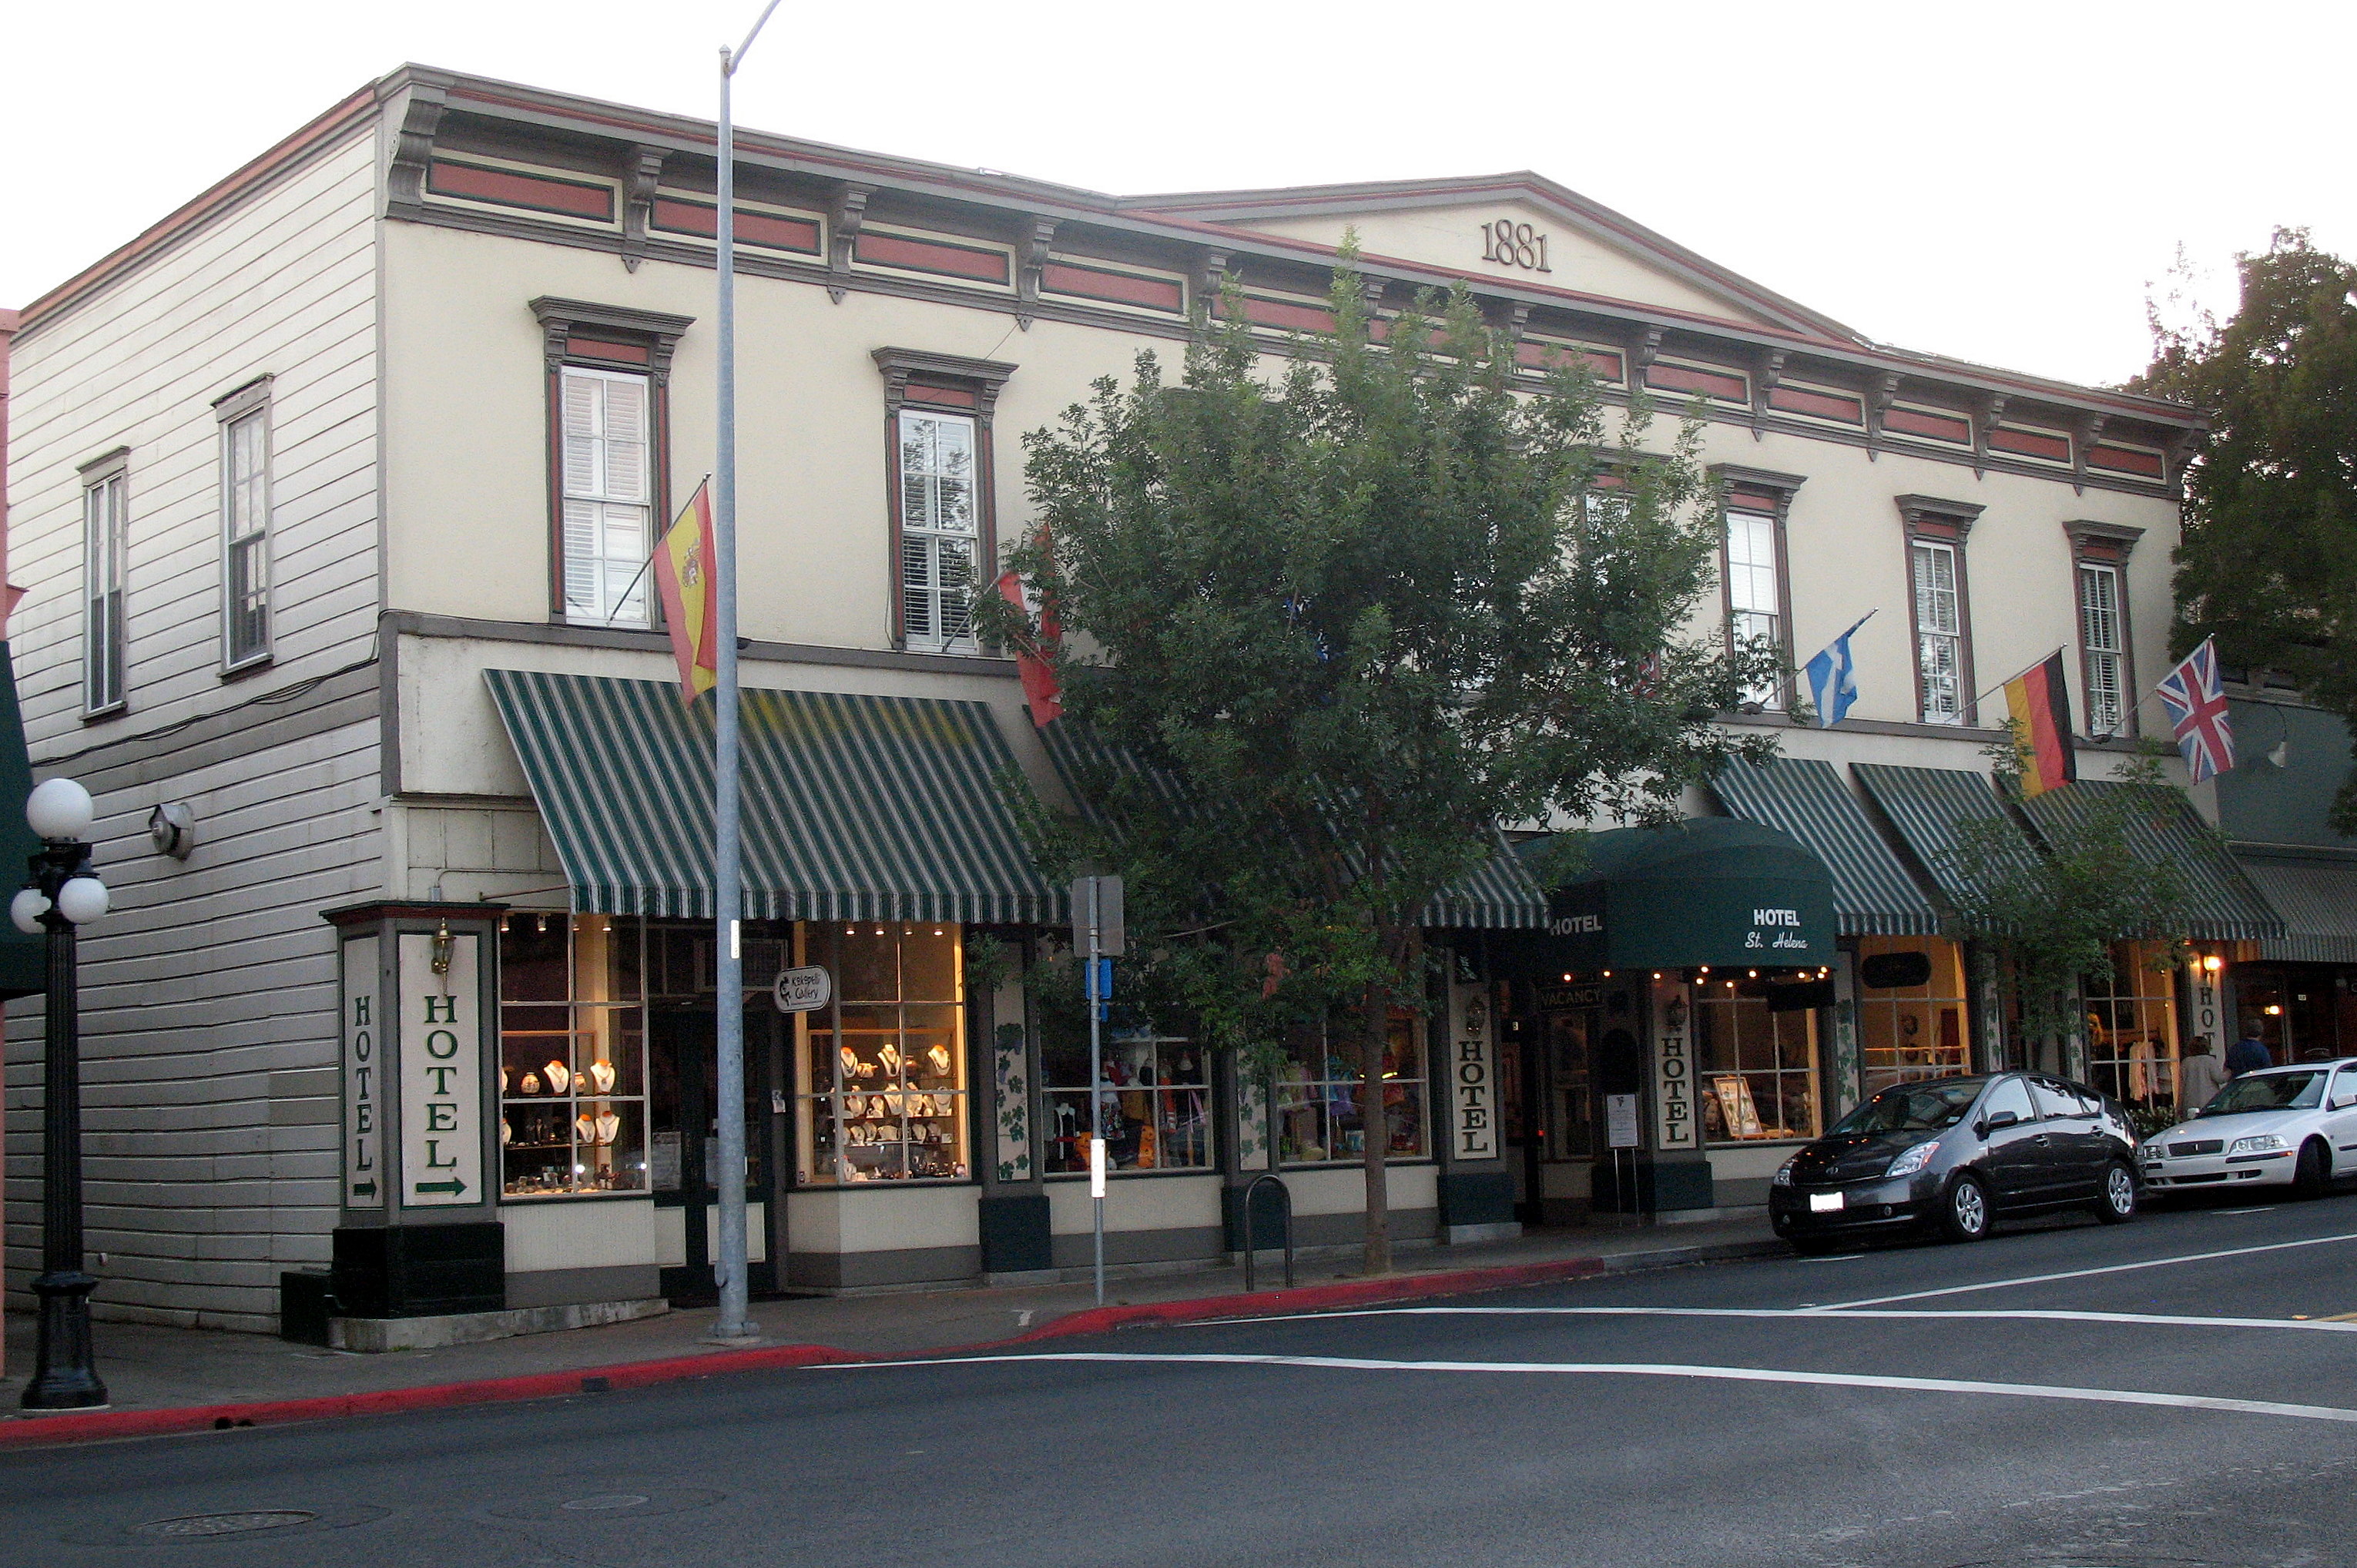 St. Helena Commercial Historic District, Hotel St. Helena, 1309 Main St., St. Helena, CA 10-9-2011 6-38-09 PM.JPG